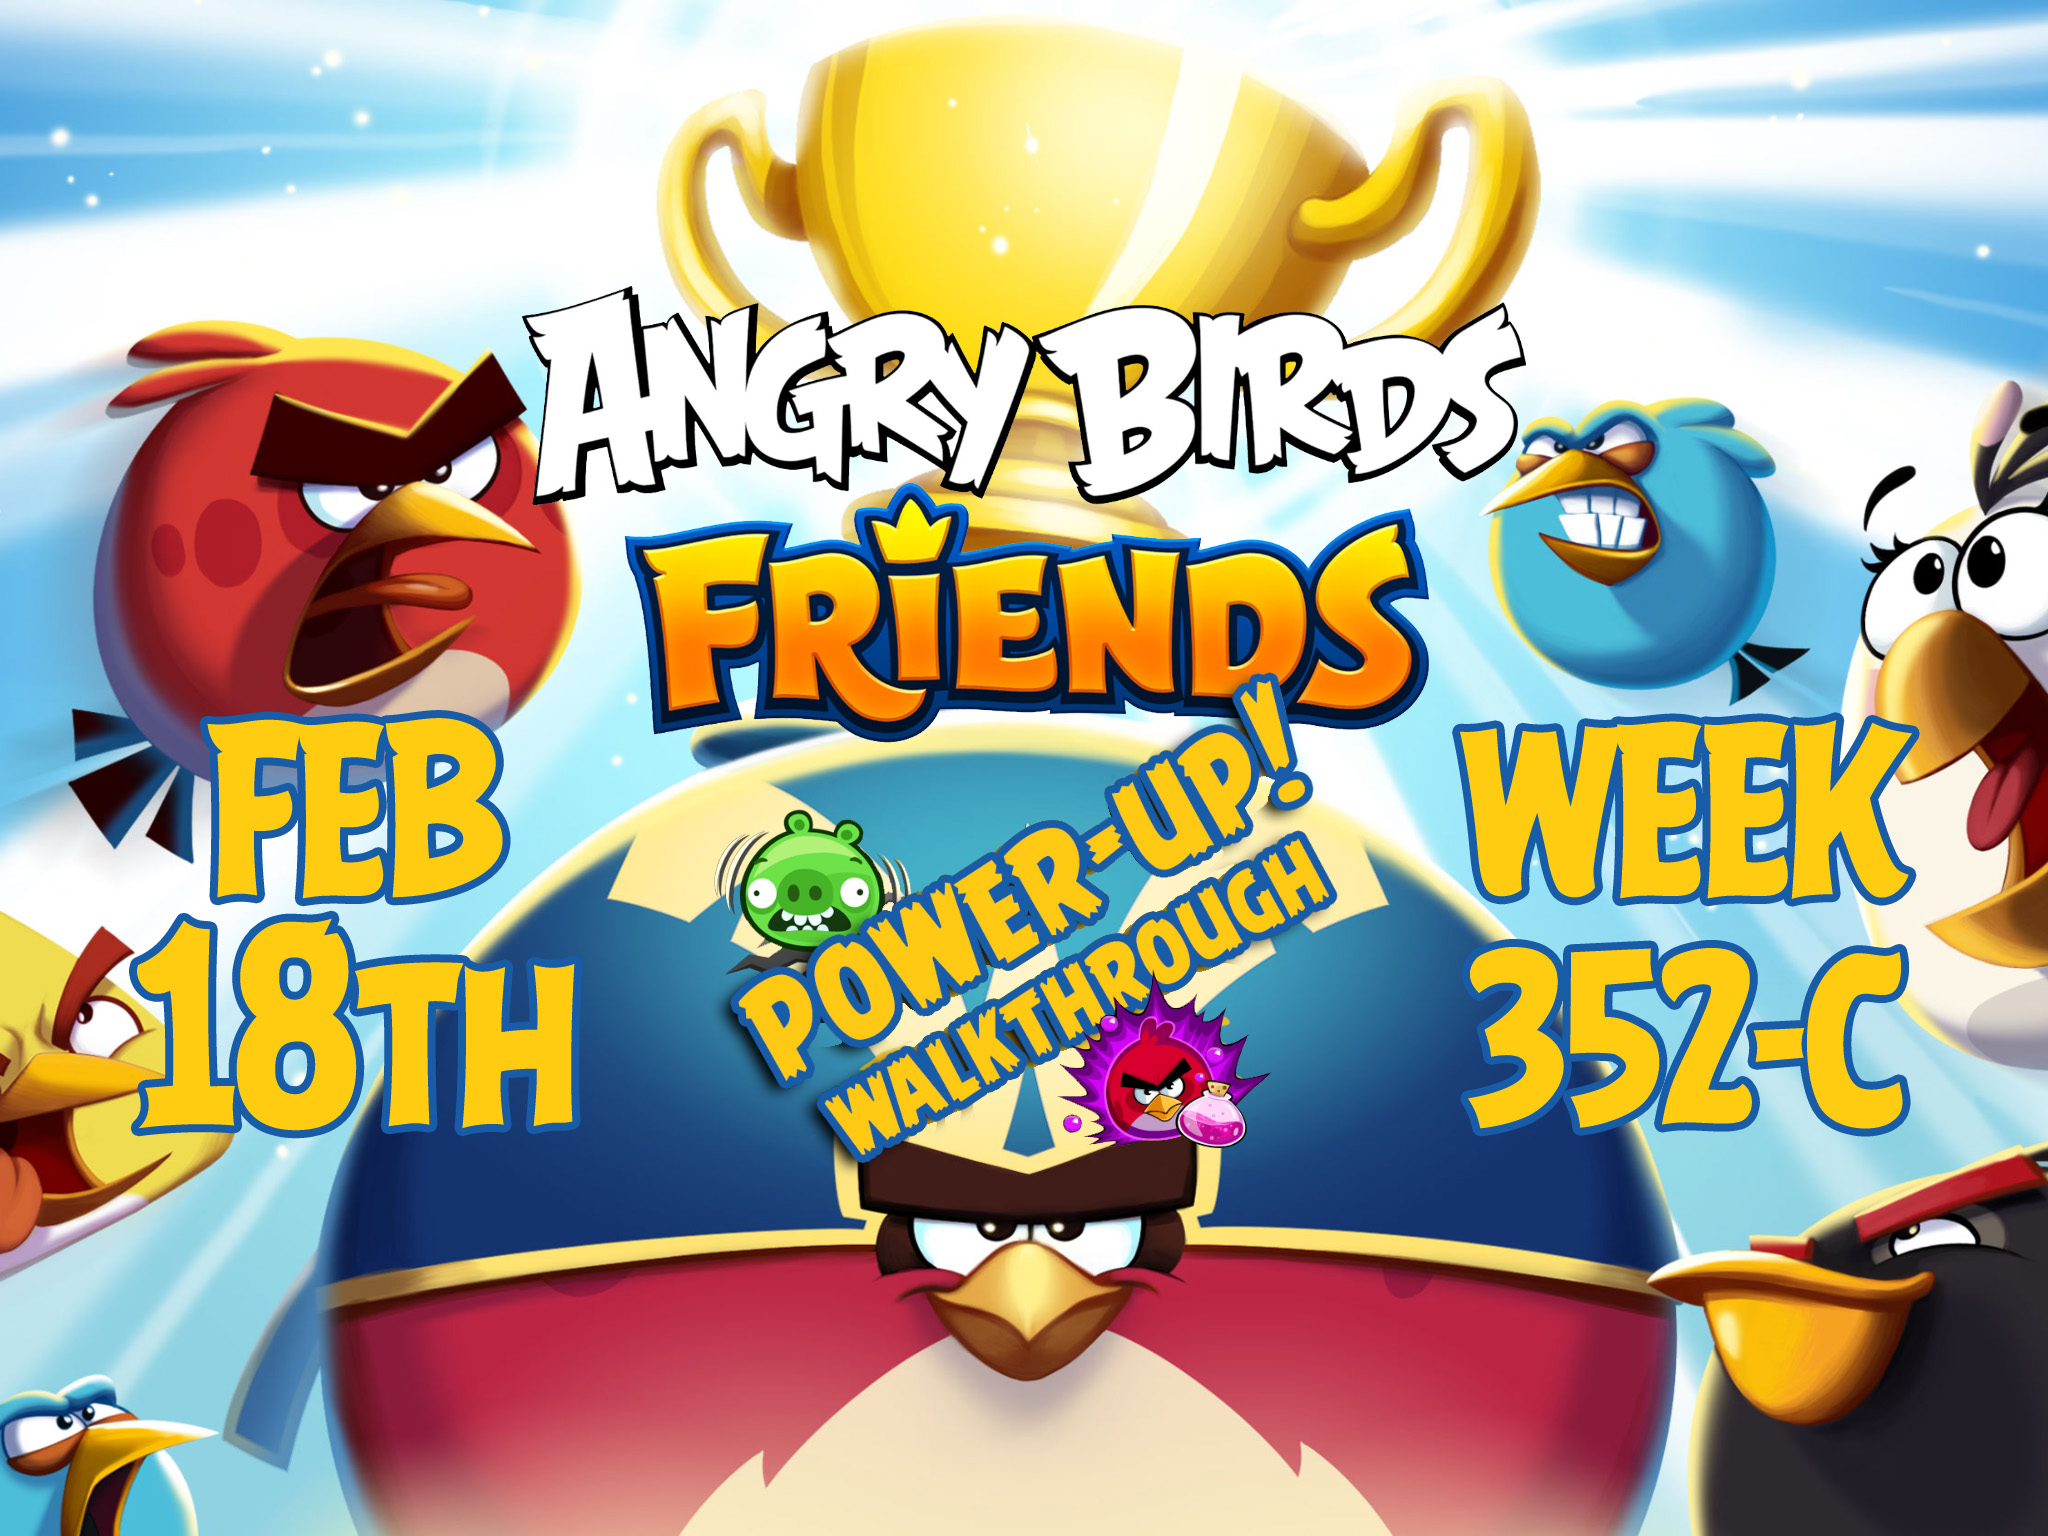 Angry-Birds-Friends-Tournament-Week-352-C-Feature-Image-PU